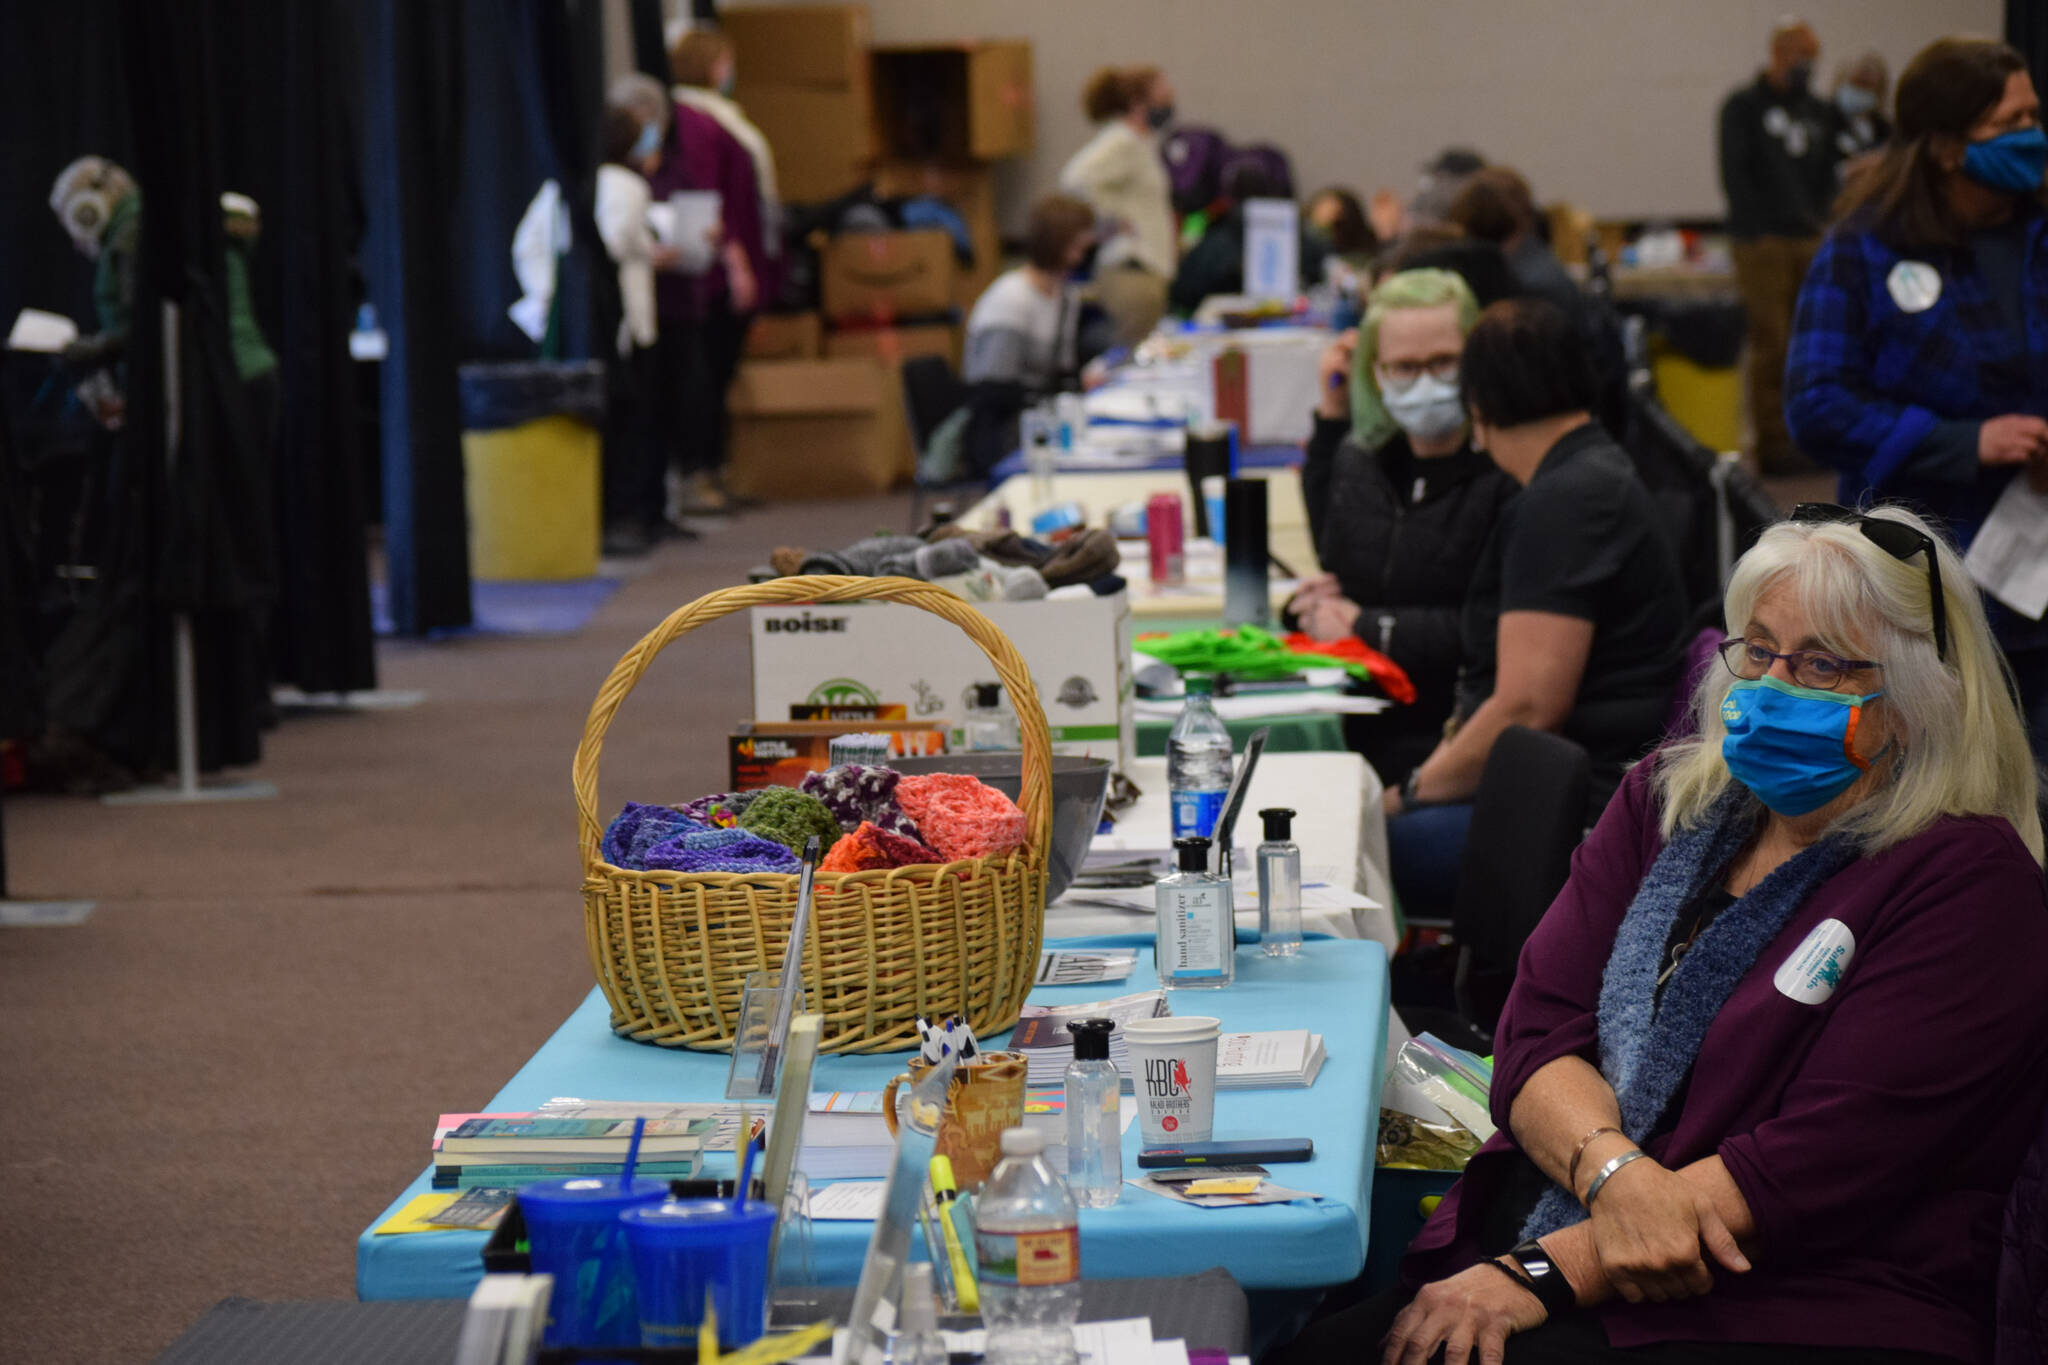 Community agencies administer social services to those in need during the Project Homeless Connect event Soldotna Regional Sports Complex in Soldotna on Wednesday, Jan. 26, 2022. (Camille Botello/Peninsula Clarion)